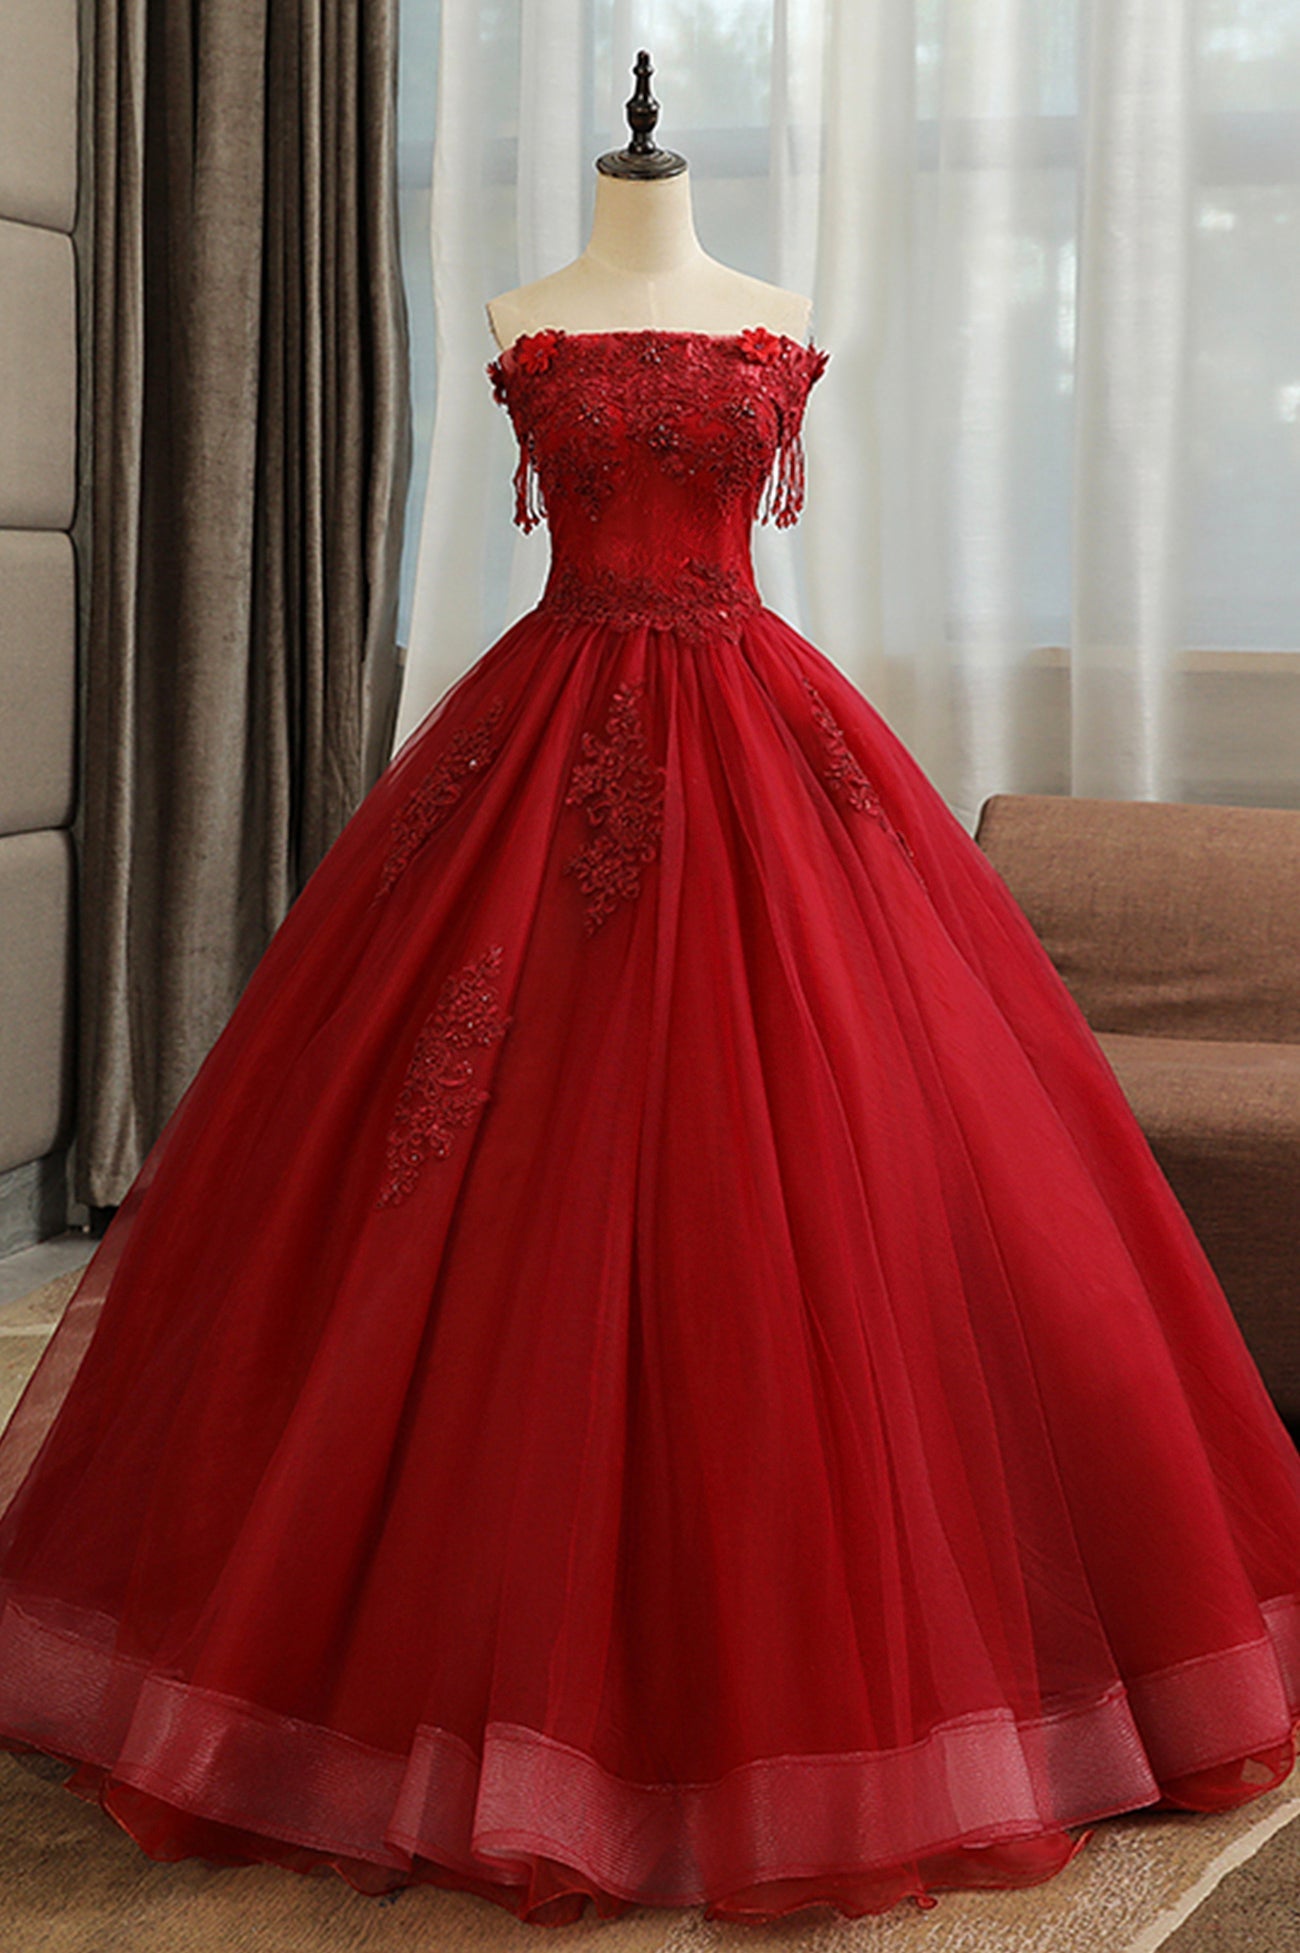 Burgundy Tulle Lace Long Prom Dress Outfits For Girls, Burgundy A-Line Evening Gown